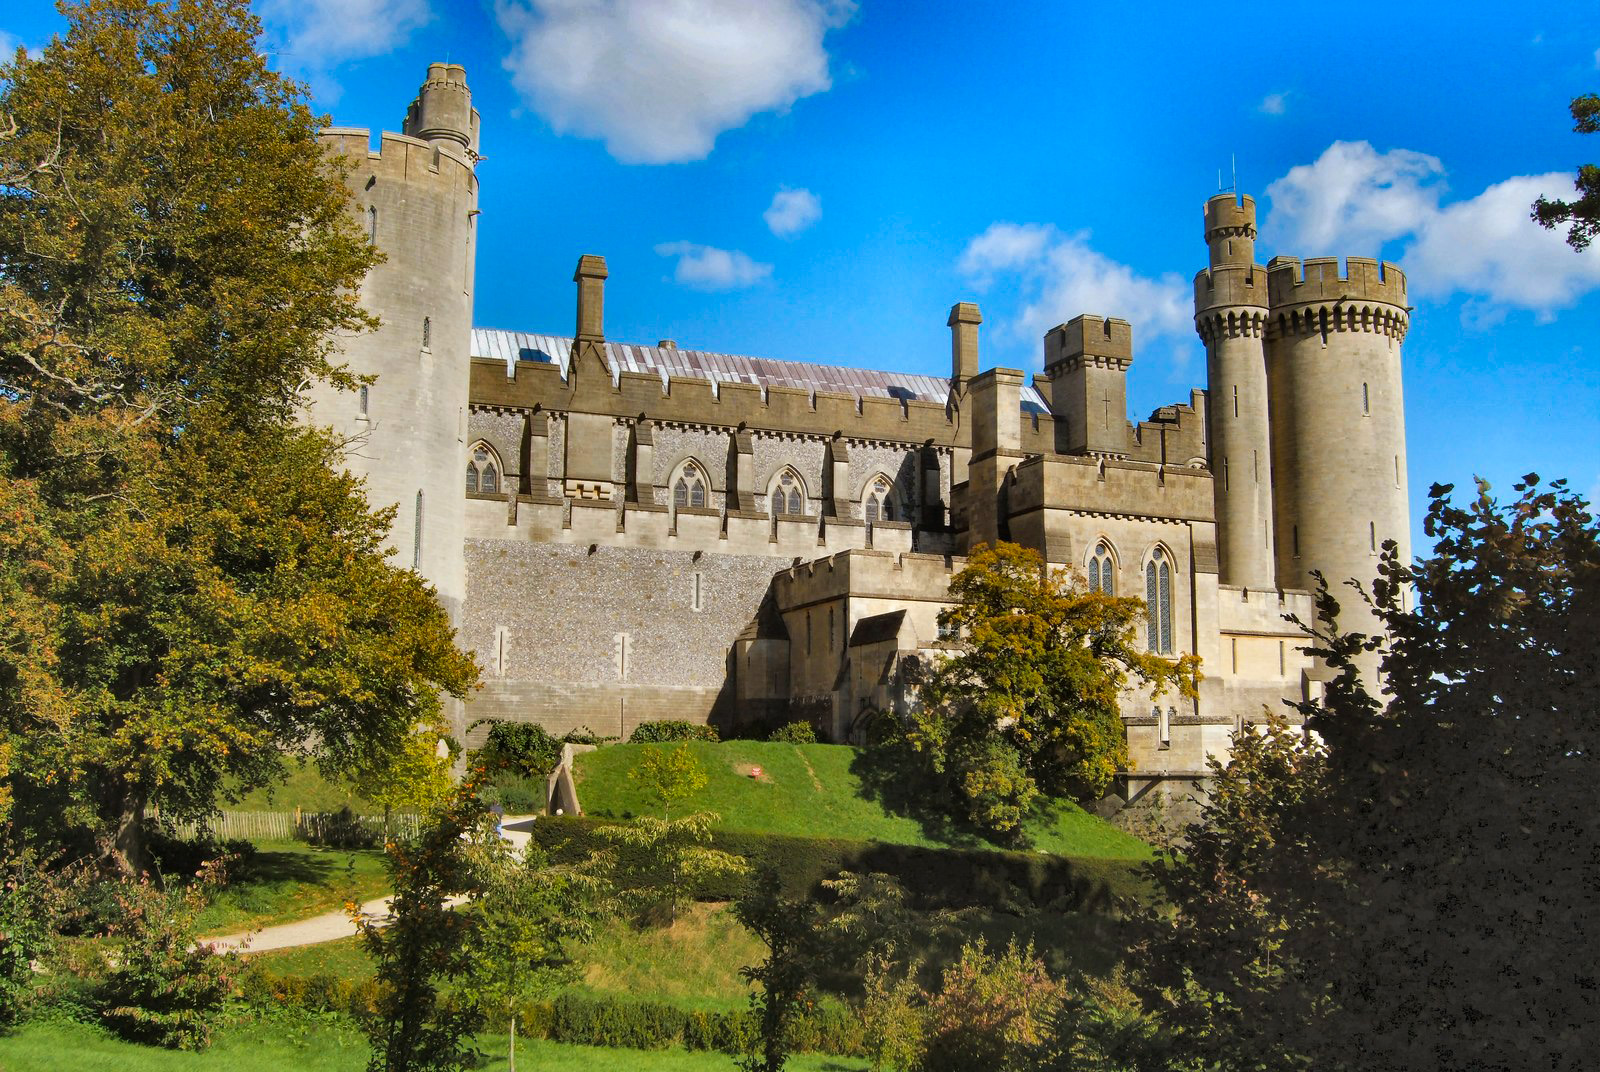 Arundel Castle © Paul Gillett - licence [CC BY-SA 2.0] from Wikimedia Commons